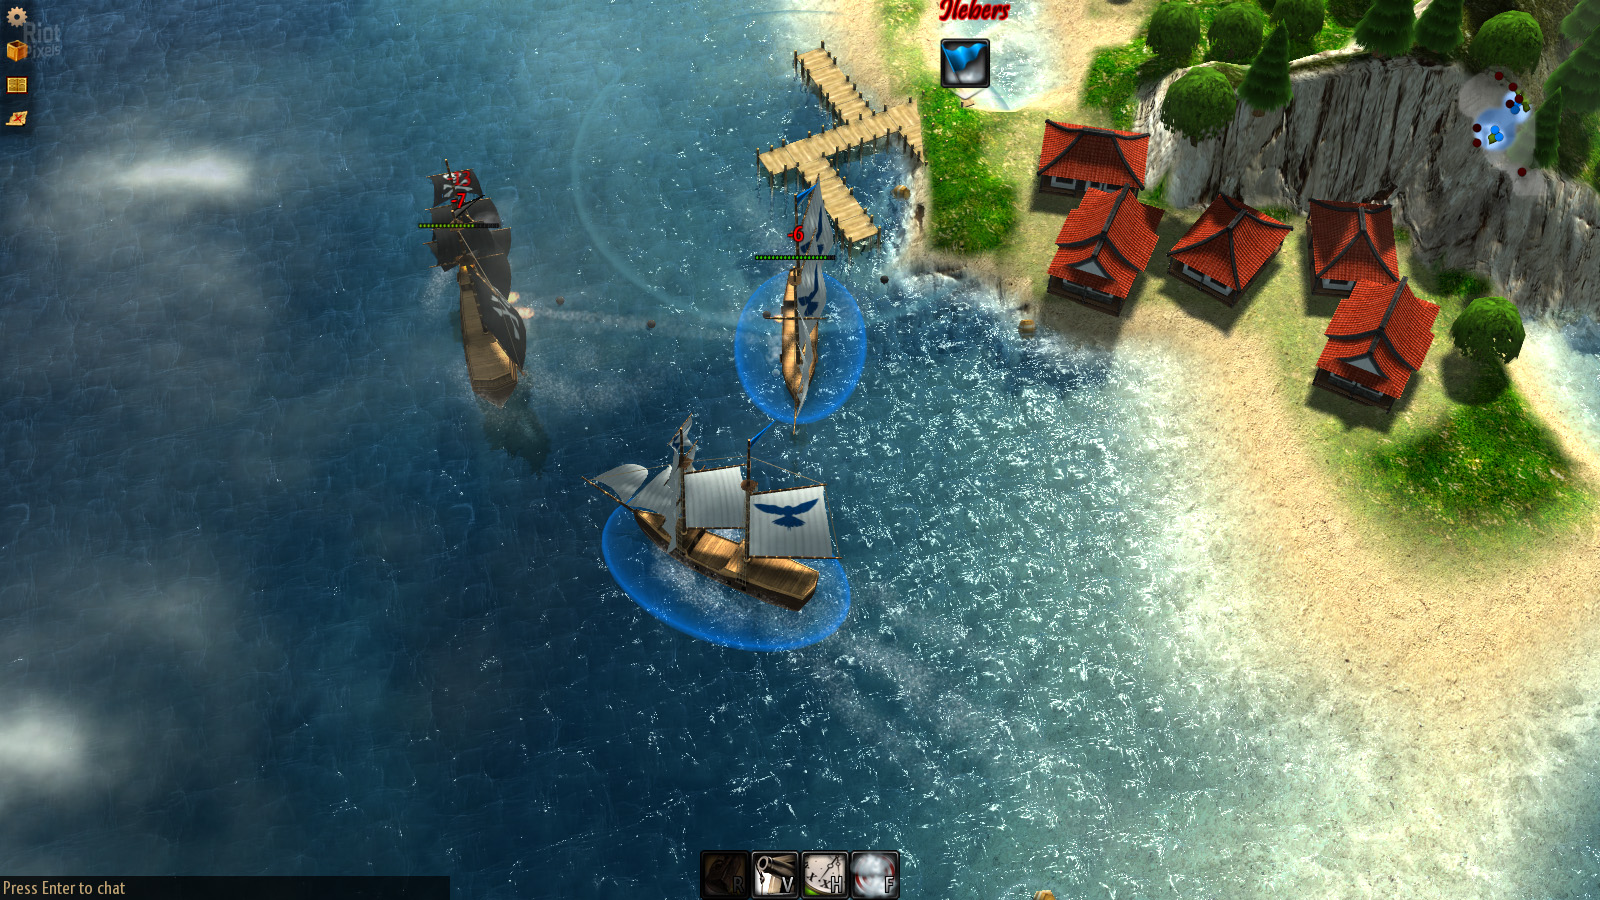 Show the open-world pirate game Windward visuals.